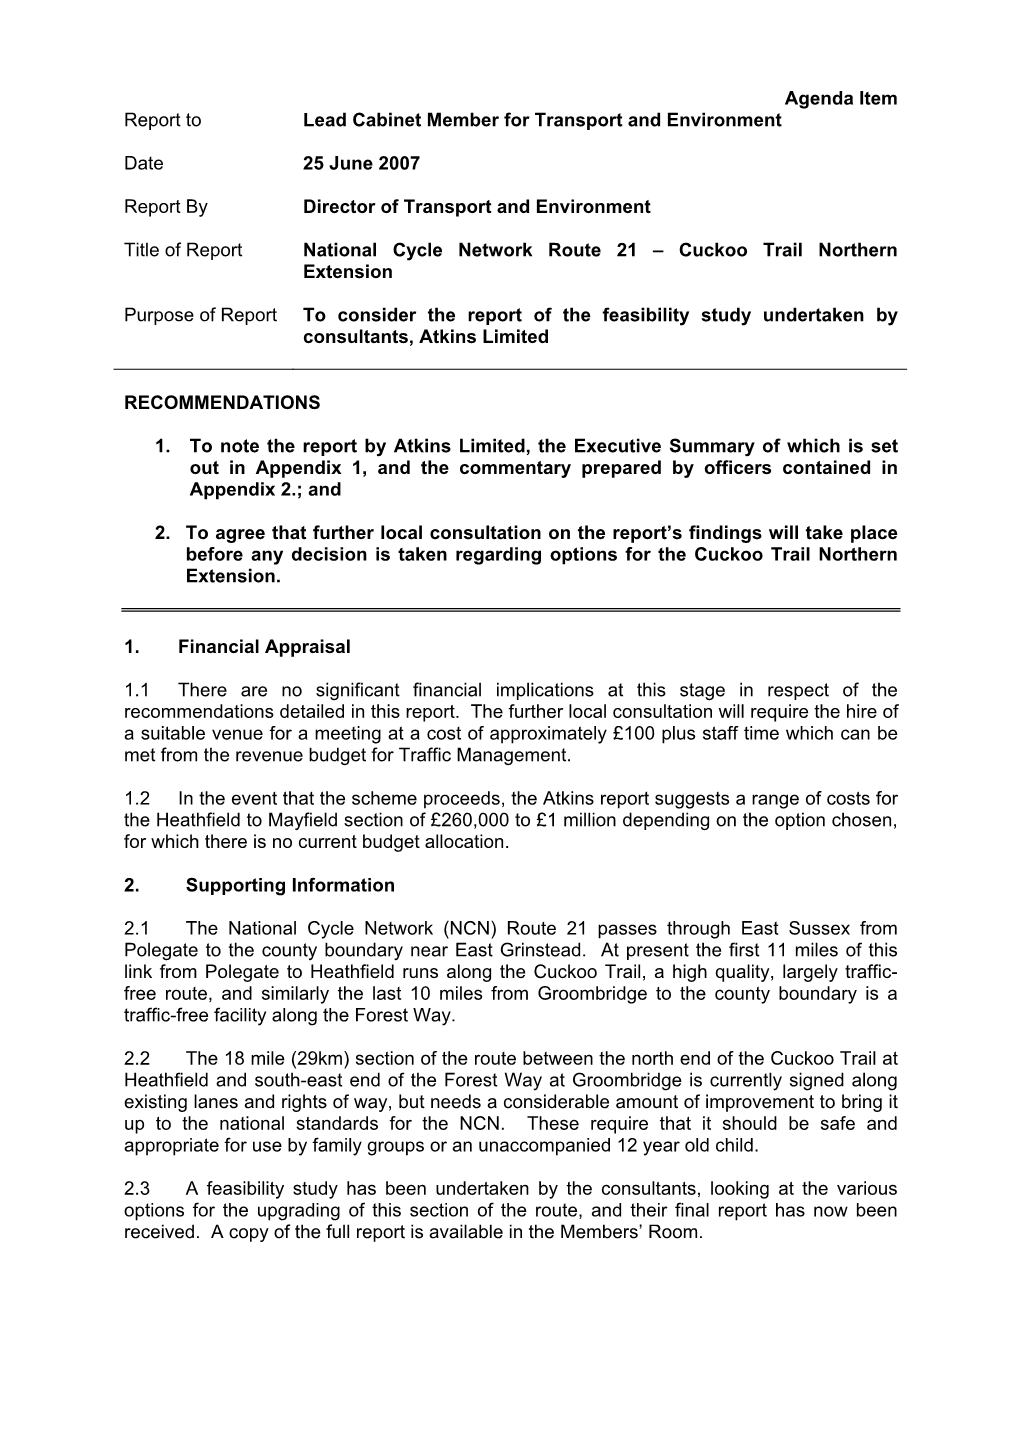 Agenda Item Report to Lead Cabinet Member for Transport and Environment Date 25 June 2007 Report by Director of Transport